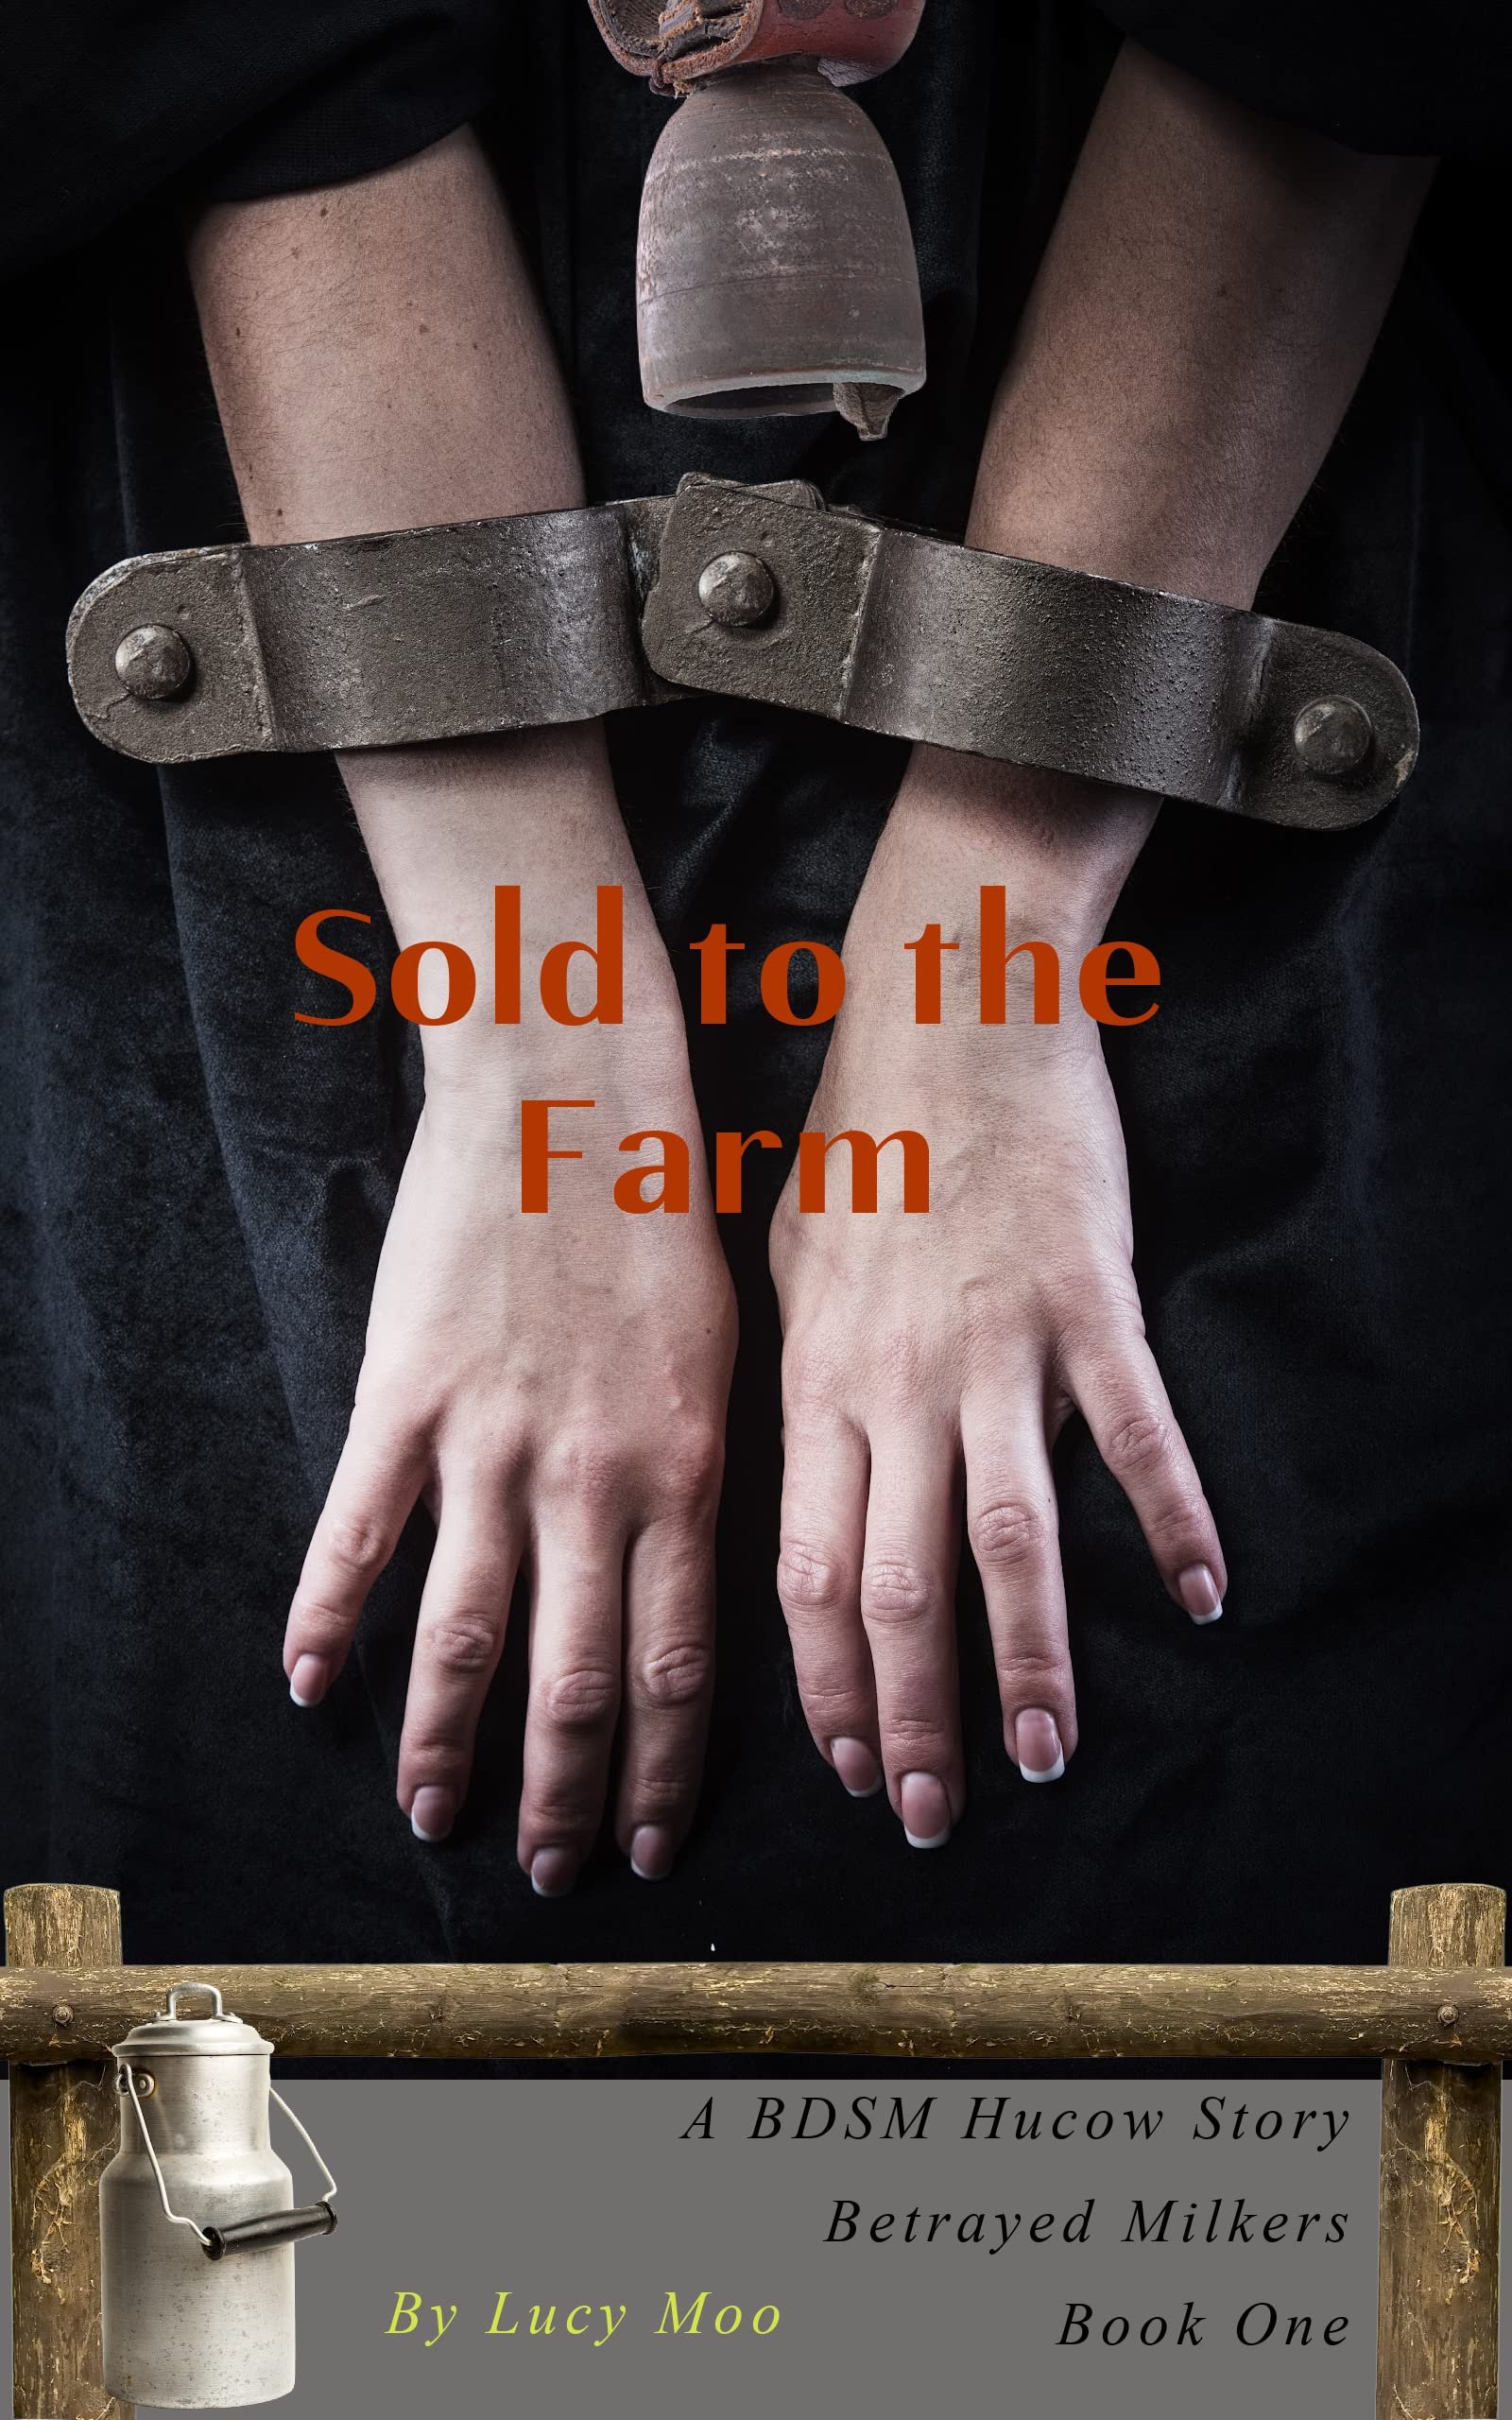 Sold to the Farm: A BDSM Hucow Story (Betrayed Milkers Book 1) Cover